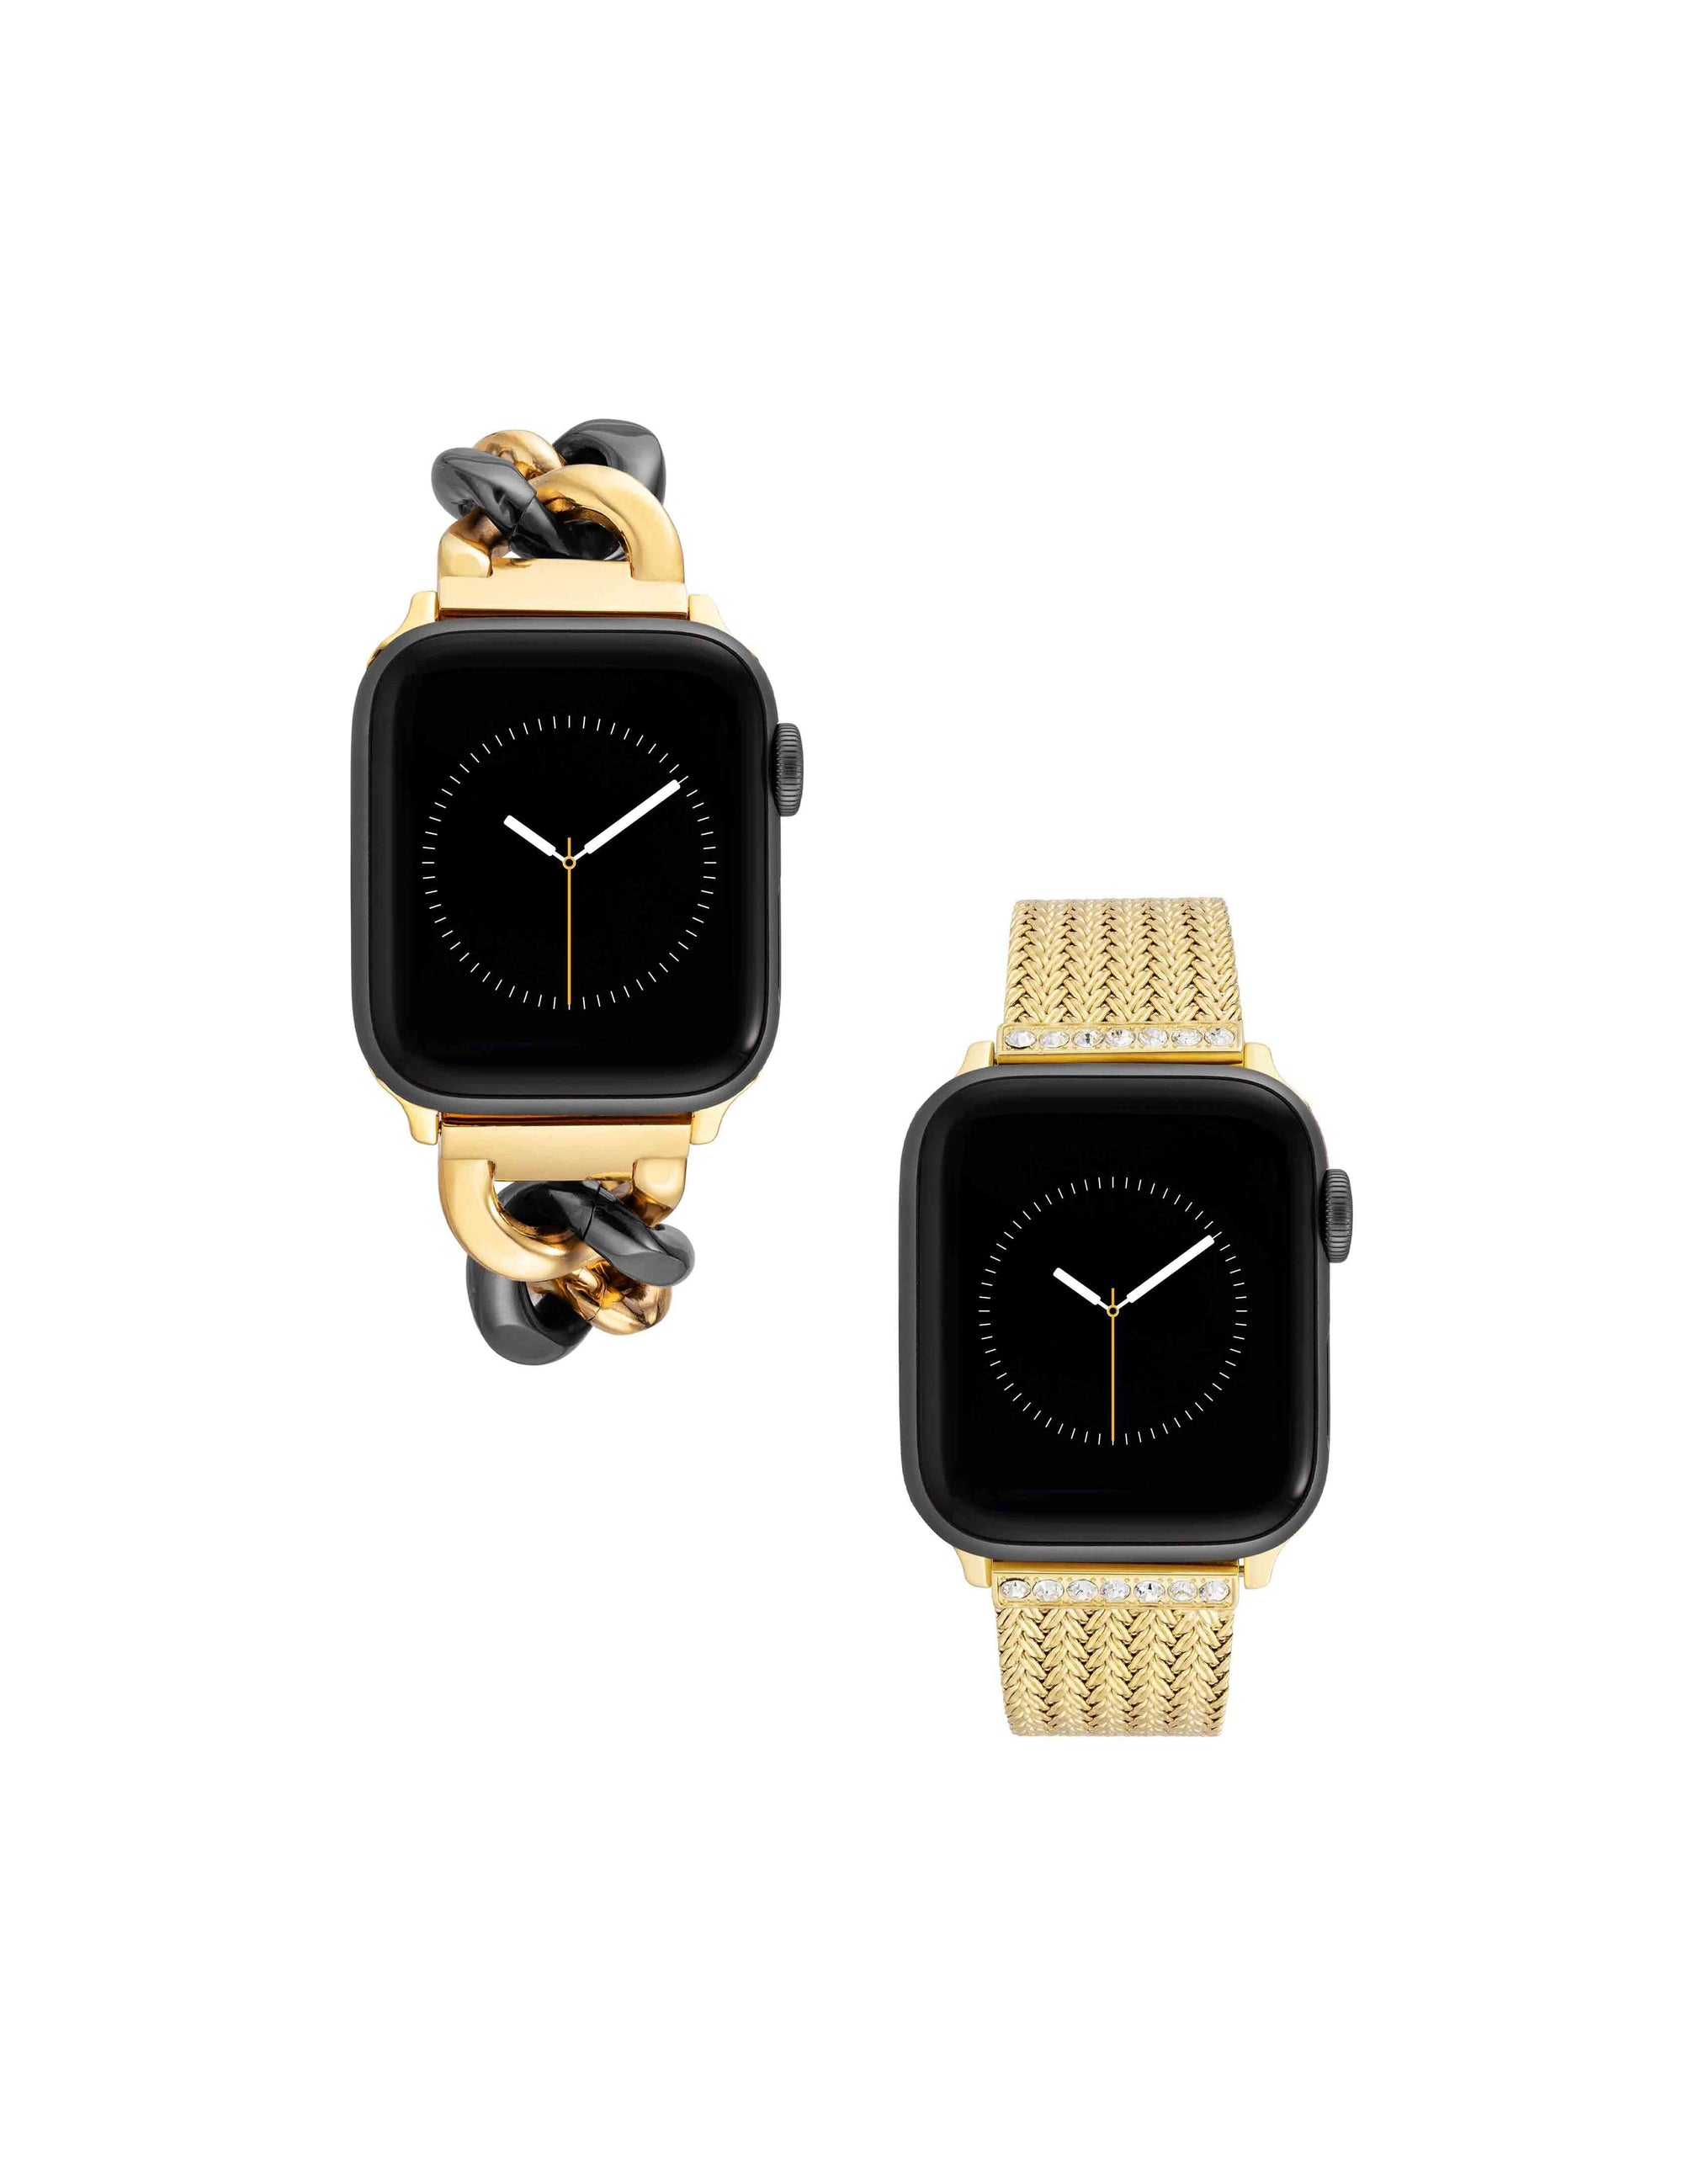 Buy Apple Watch Band Louis Vuitton Online In India -  India